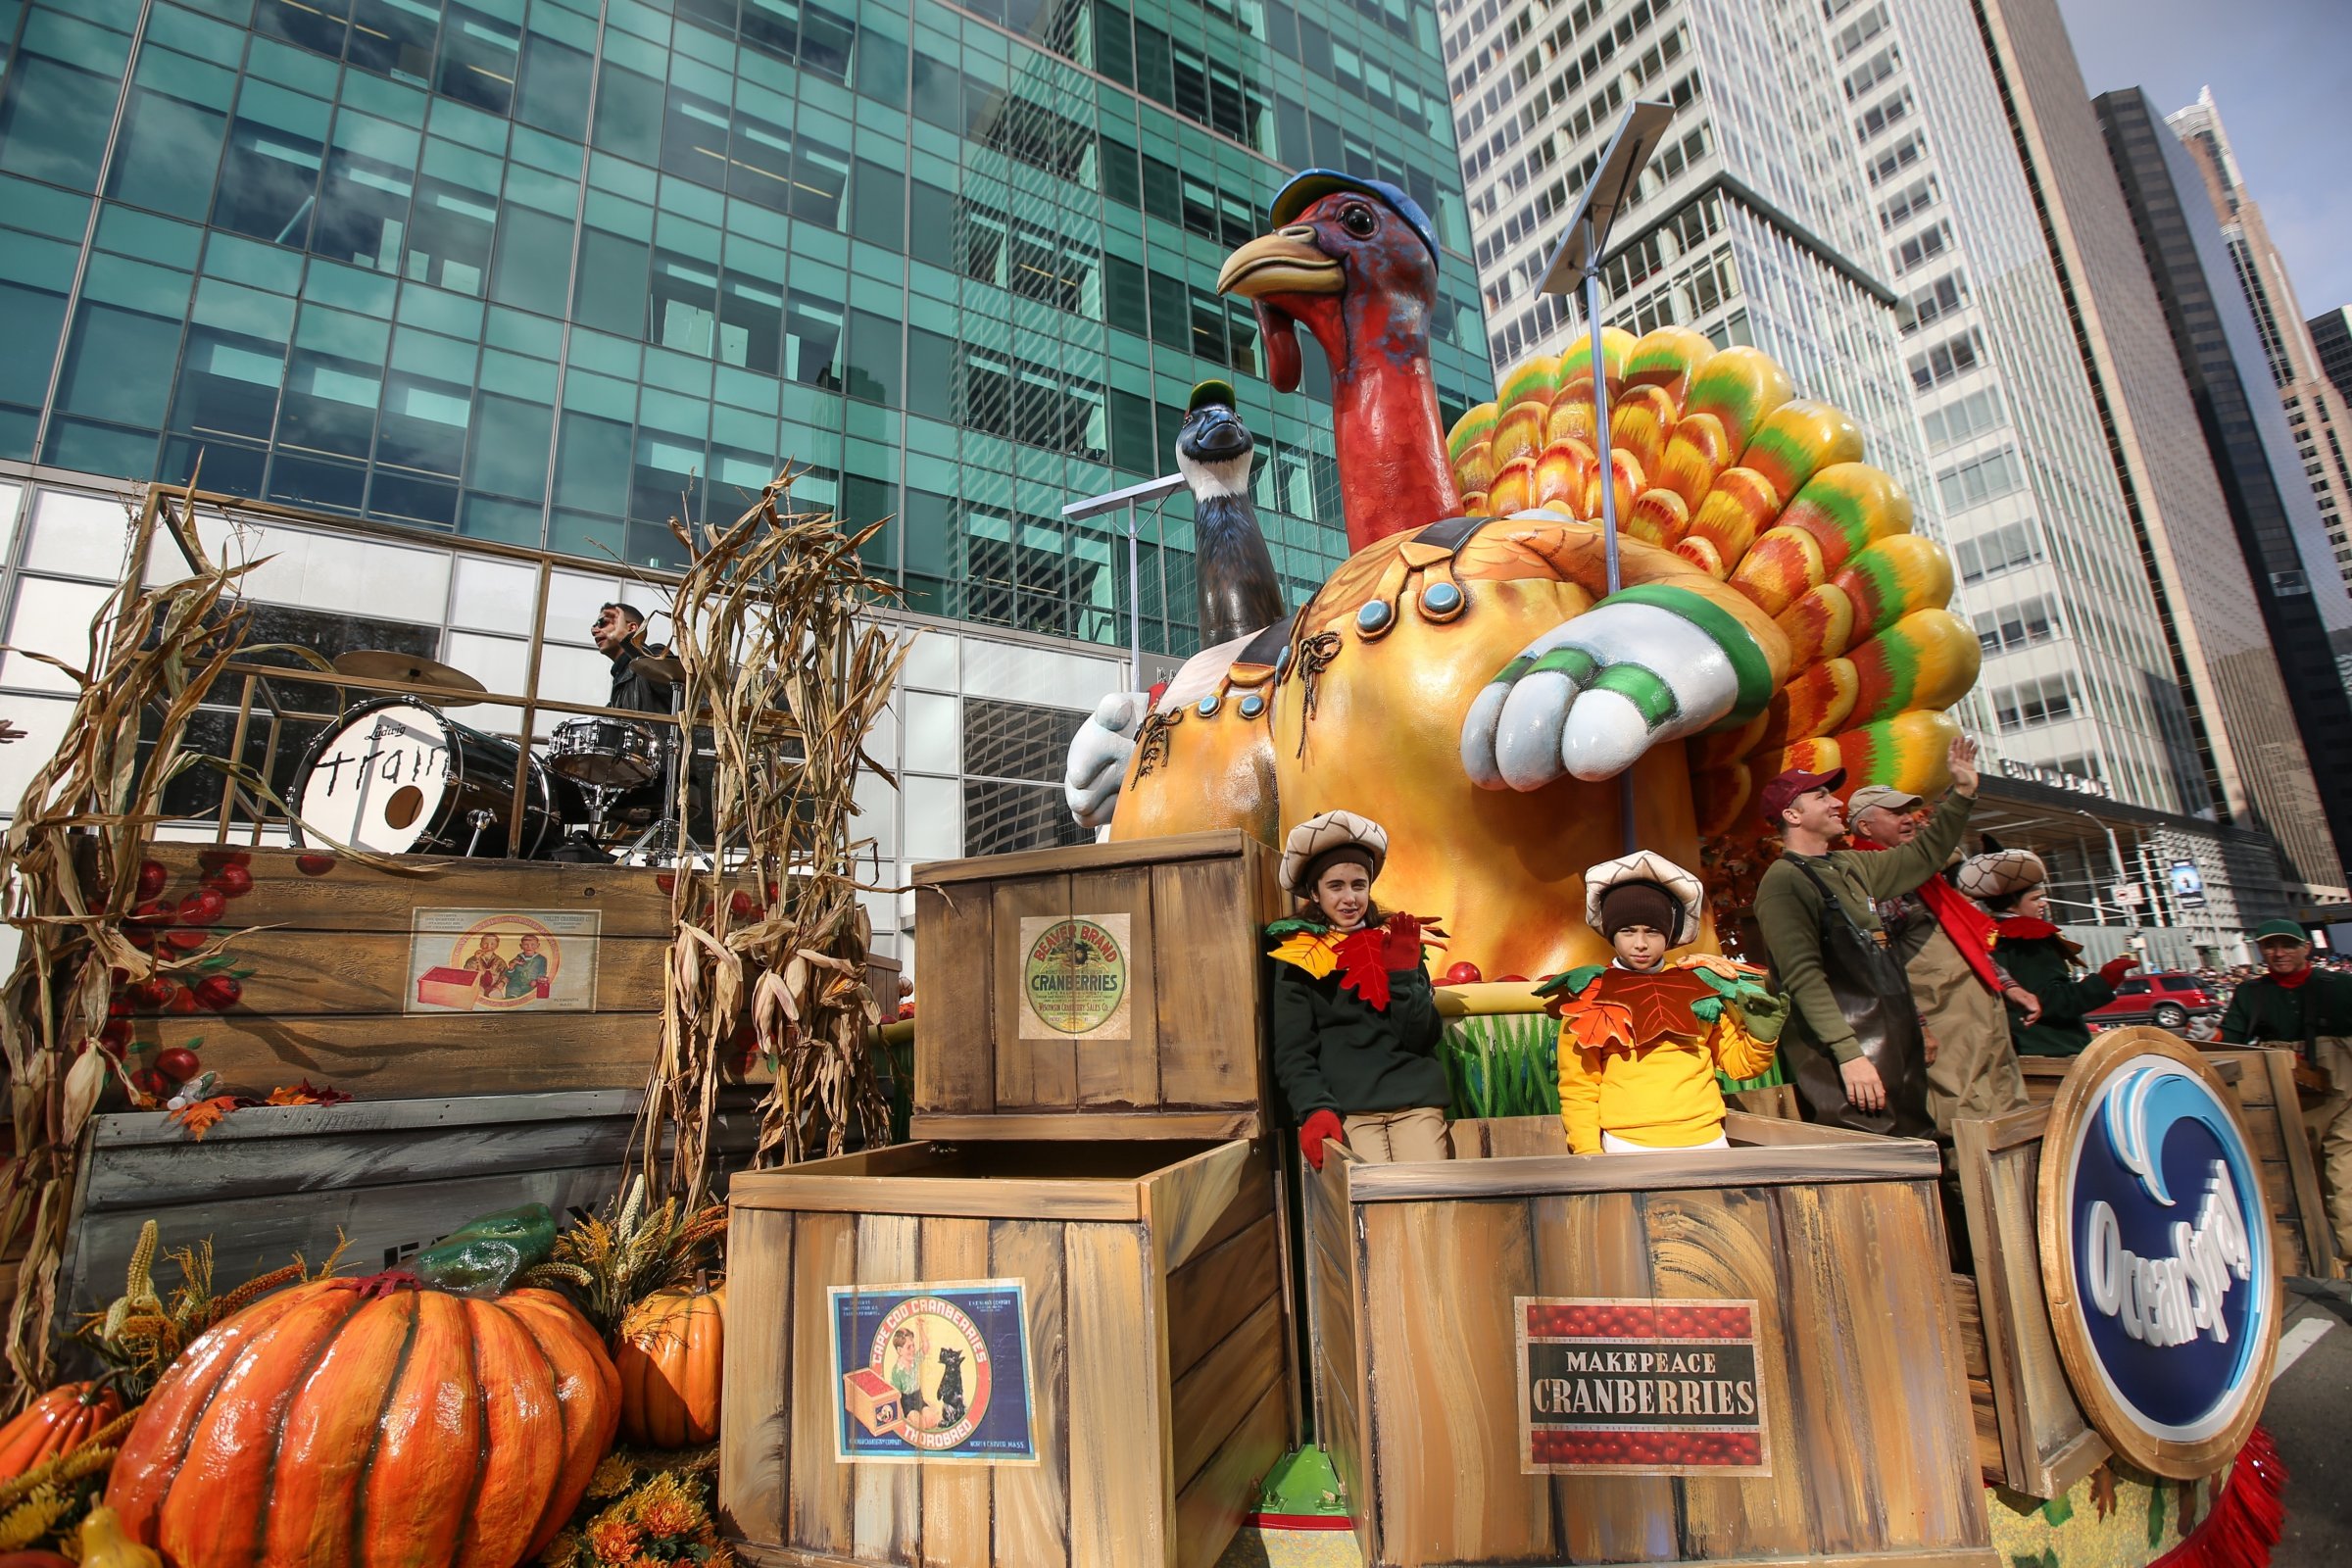 89th Annual Macys Thanksgiving Day Parade in New York